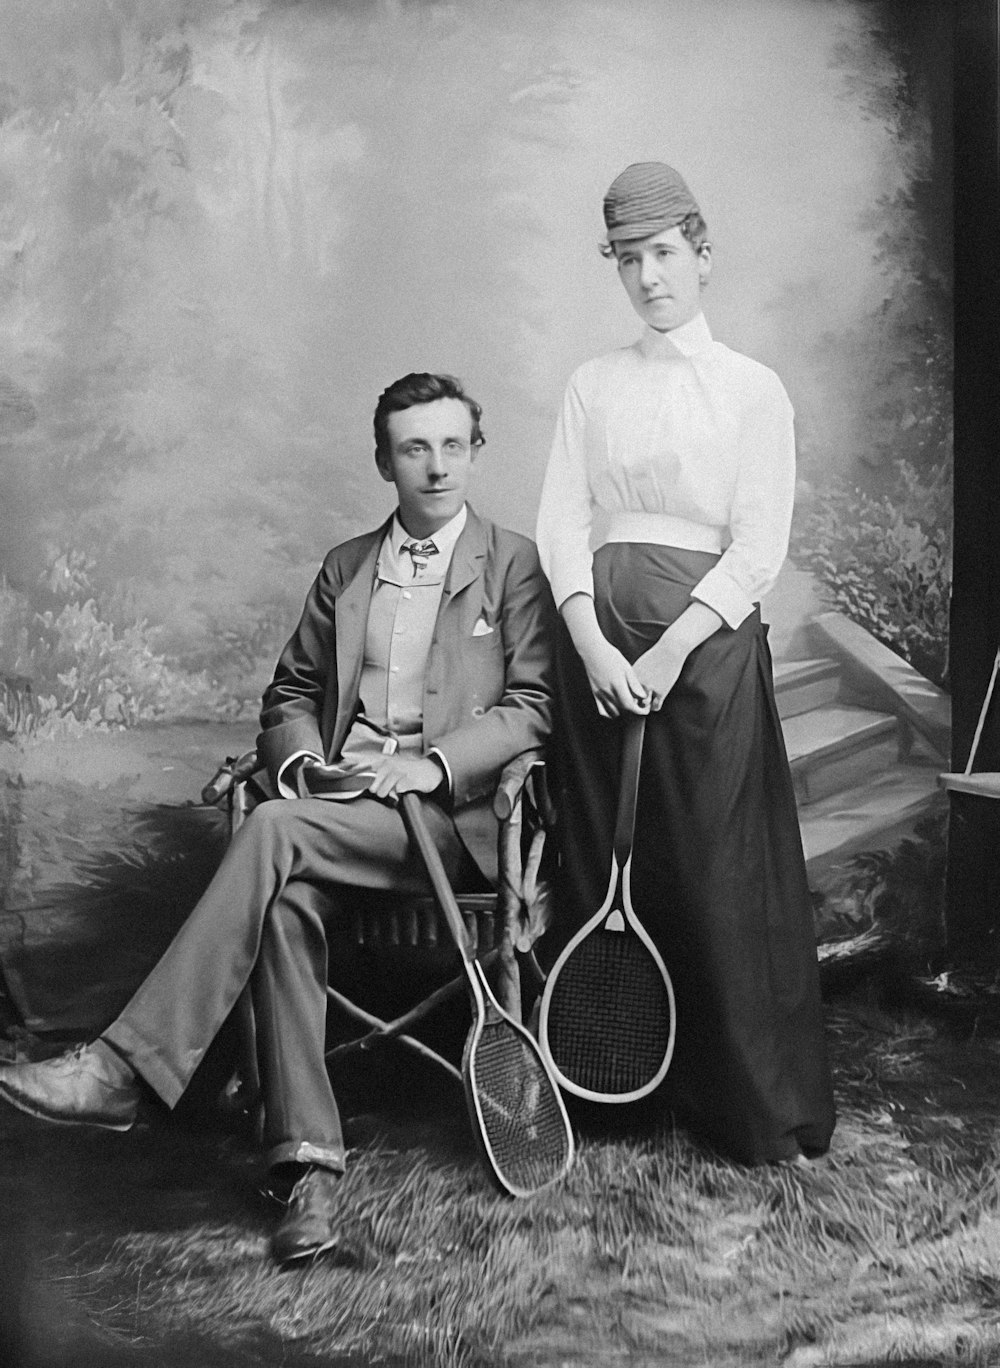 a couple of people that are holding tennis rackets